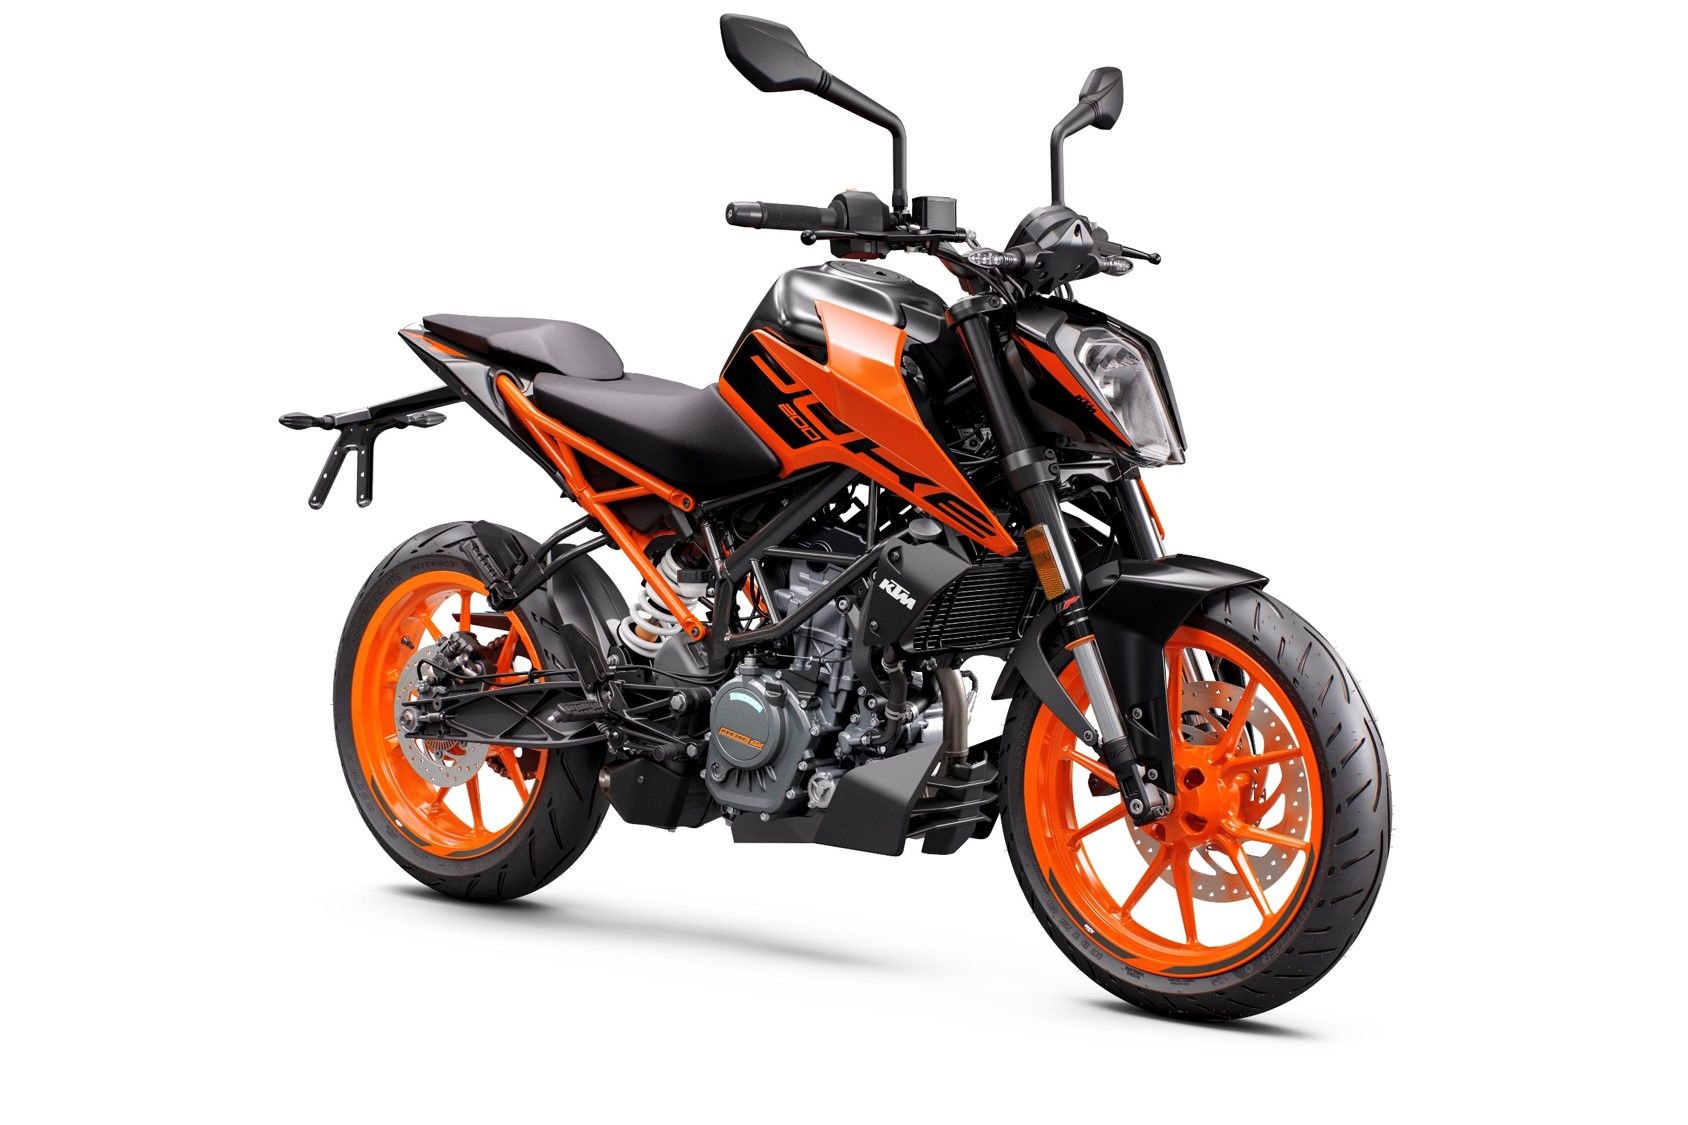 KTM 200 Duke BS6: 5 Things To Know